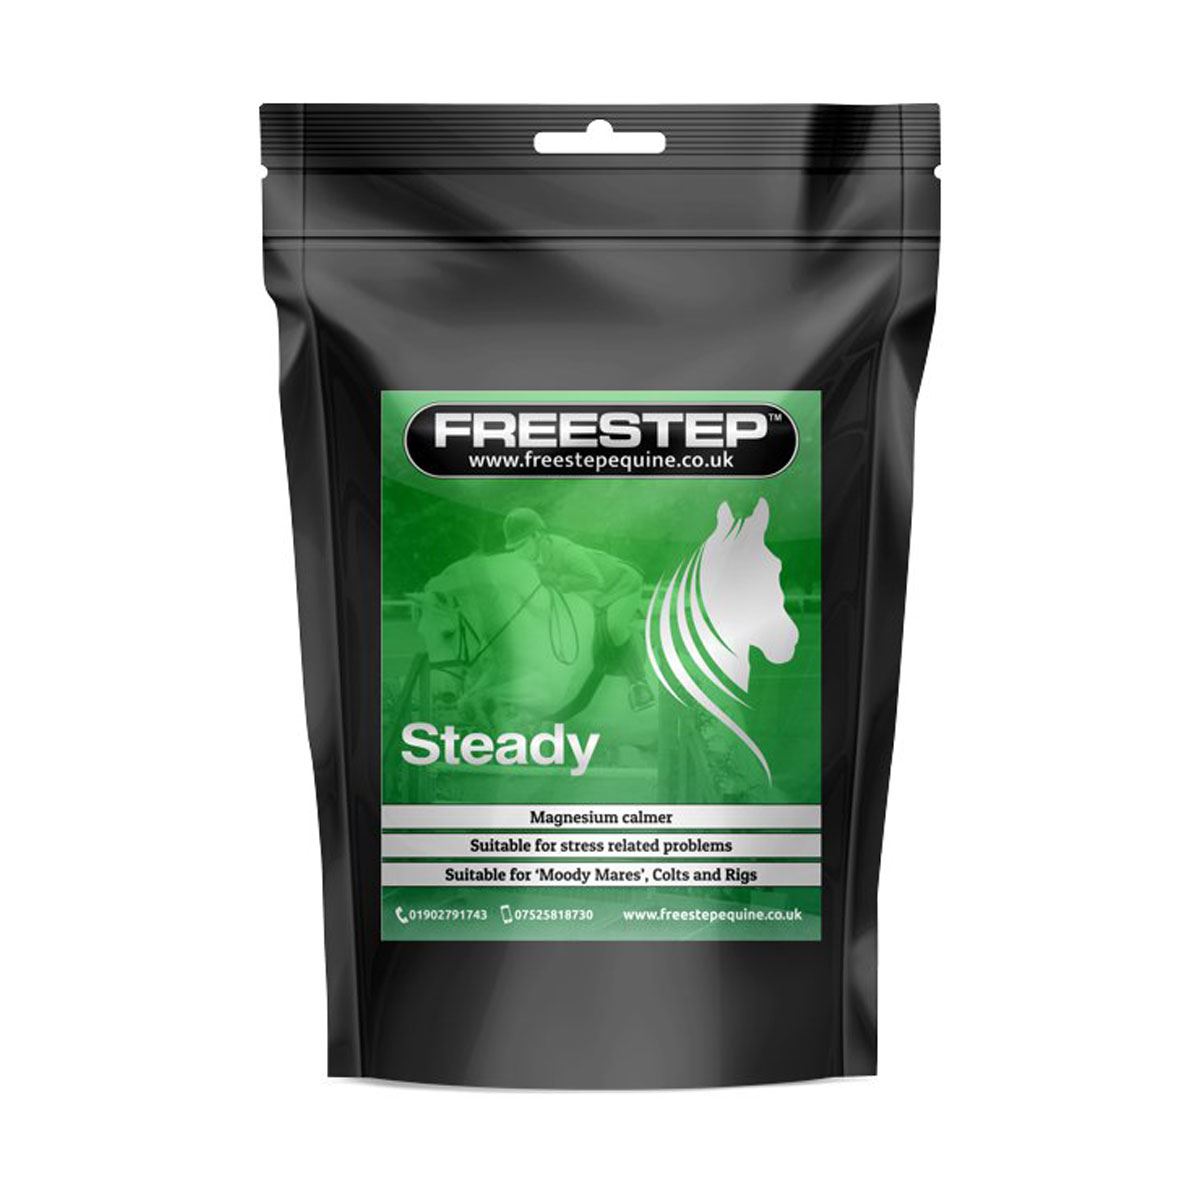 Freestep Steady - Just Horse Riders